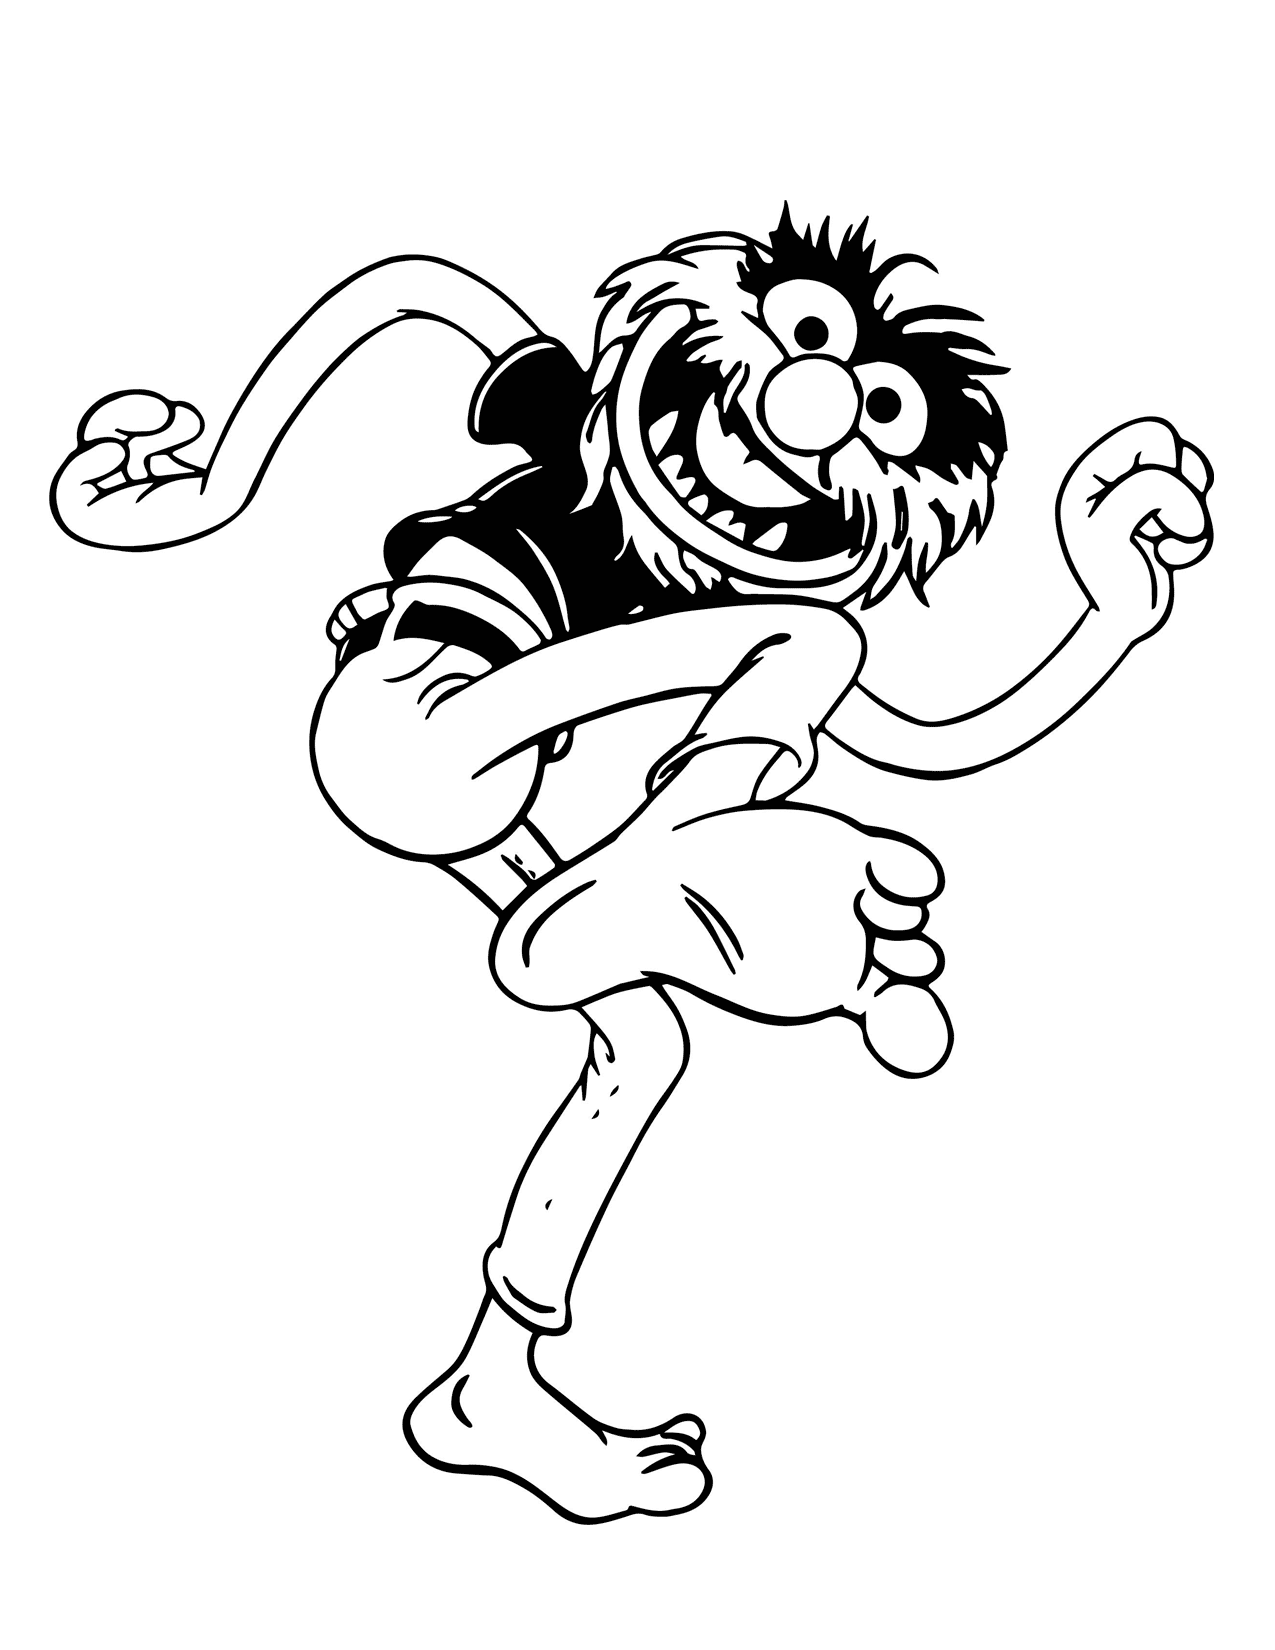 Animal Dancing Muppet Show Coloring Page